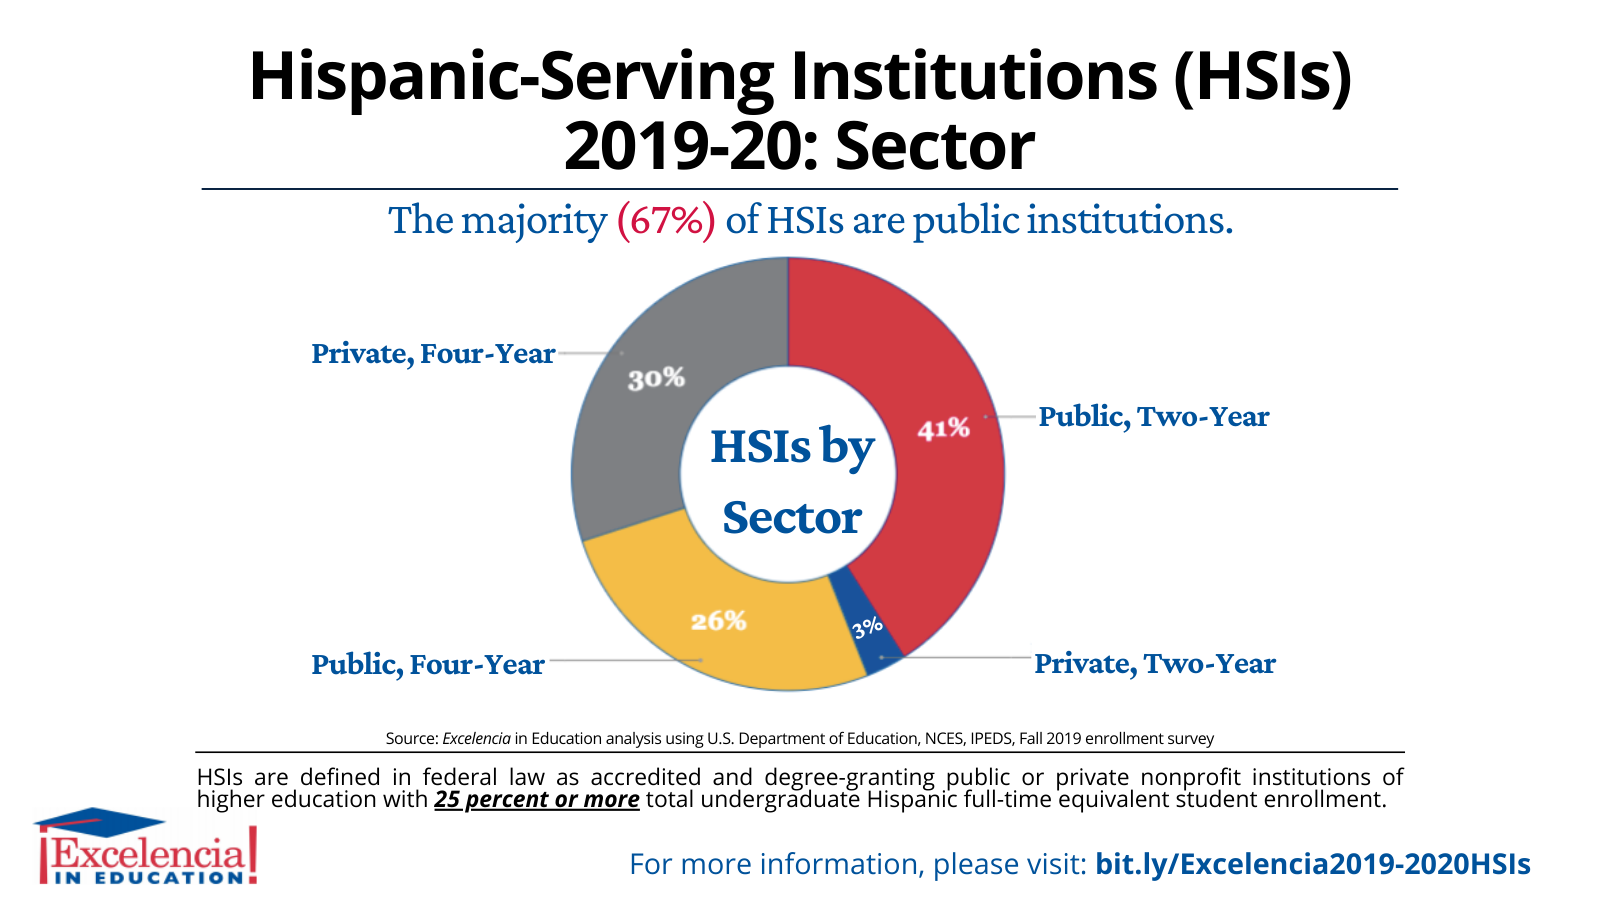 Infographic-Hispanic-Serving Institutions (HSIs) 2019-2020: Sector